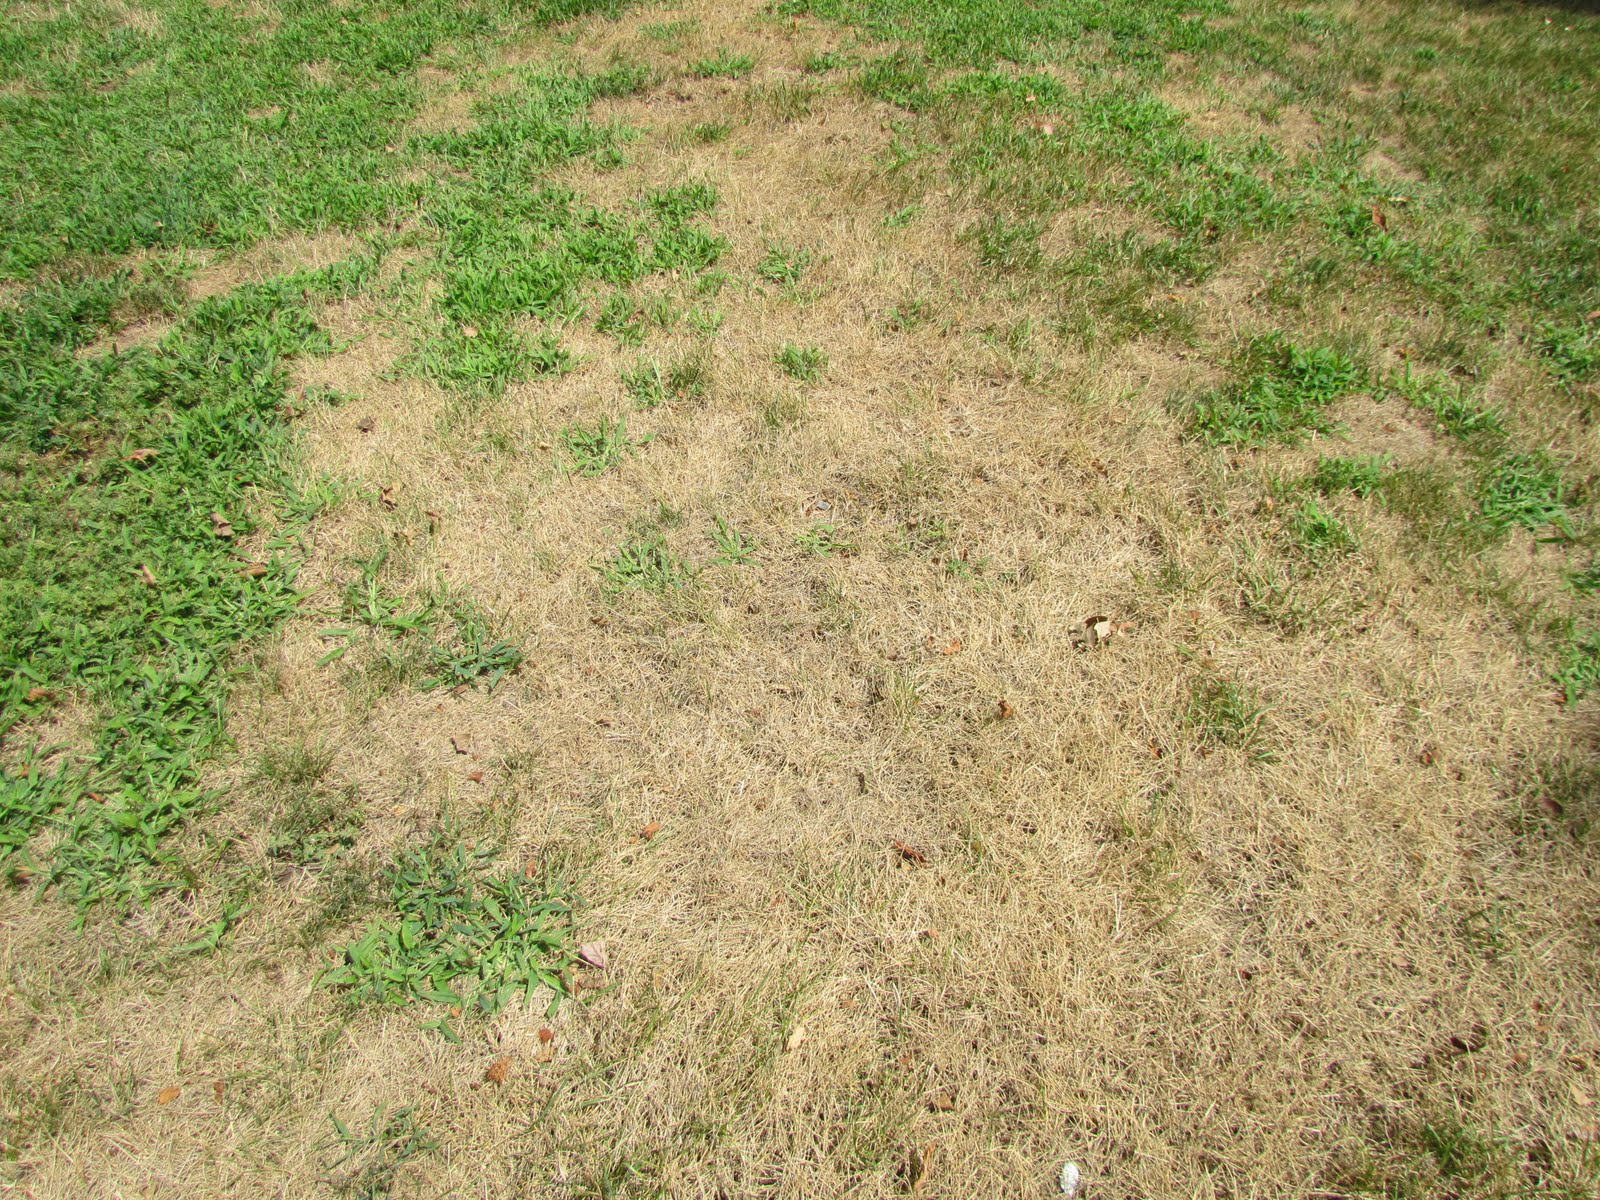 Turf: Dead or Alive? | Purdue University Turfgrass Science at Purdue ...